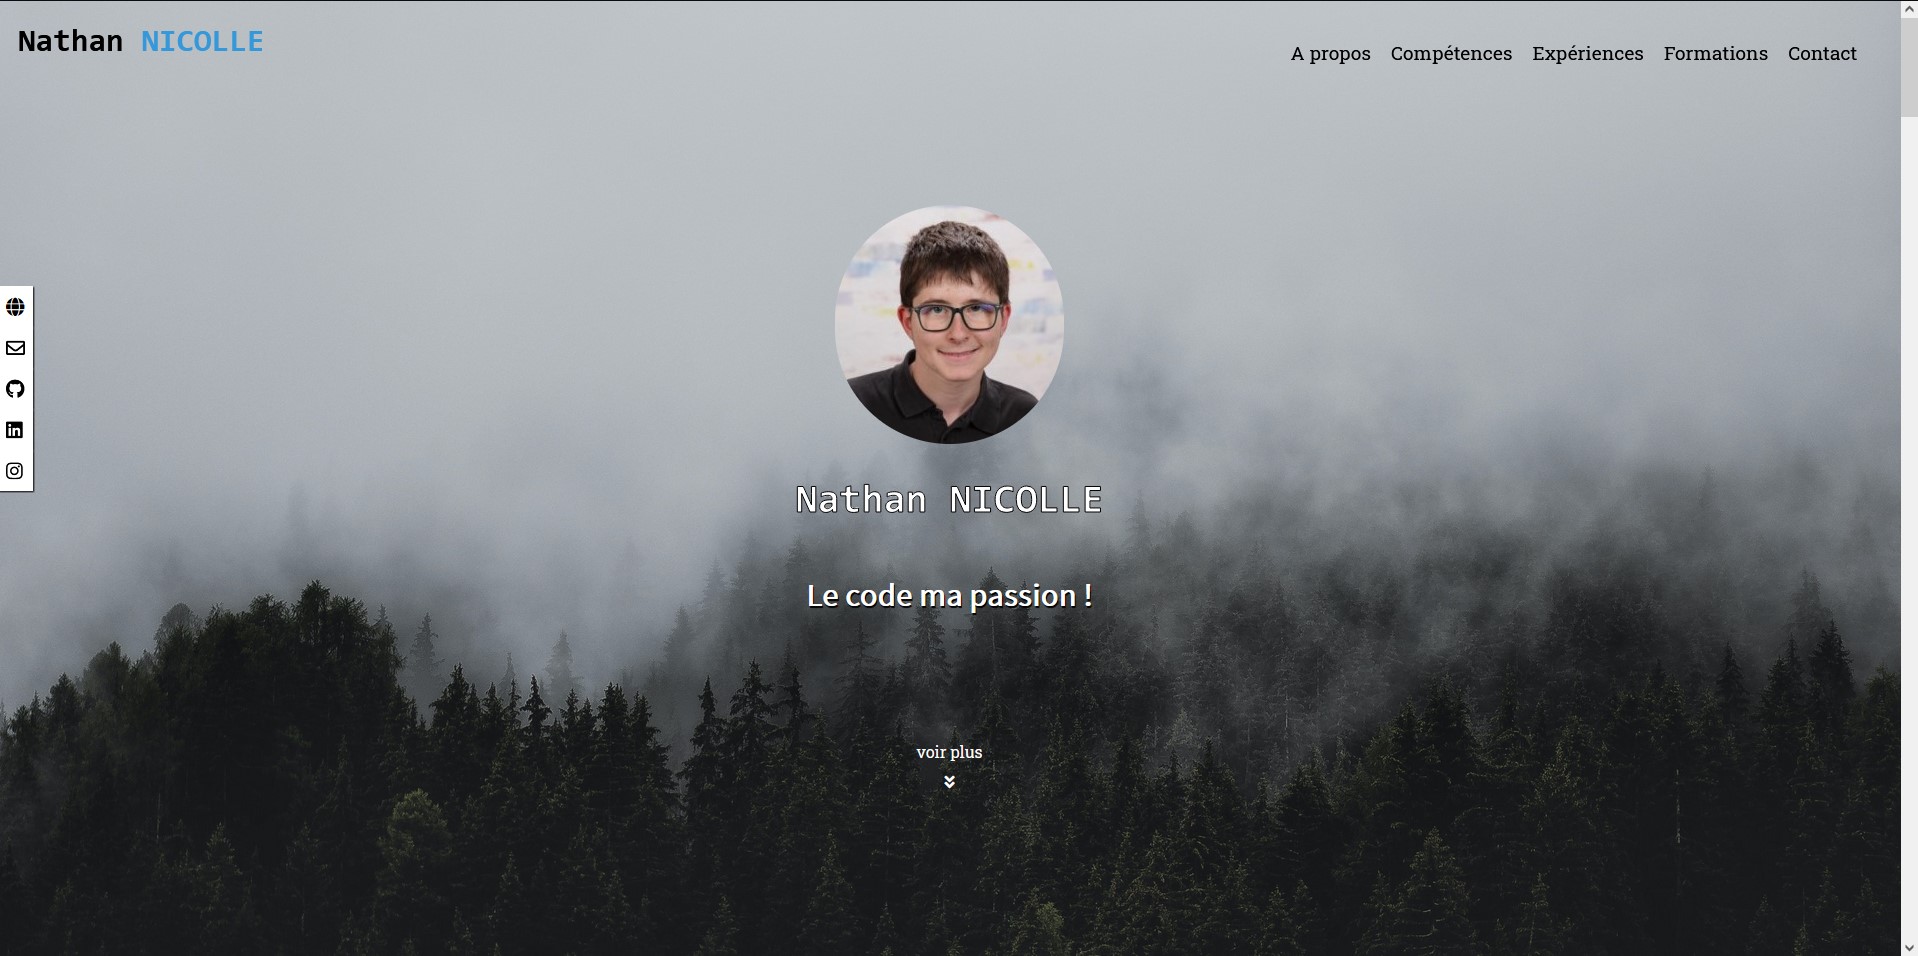 nathannicolle.fr/profil/